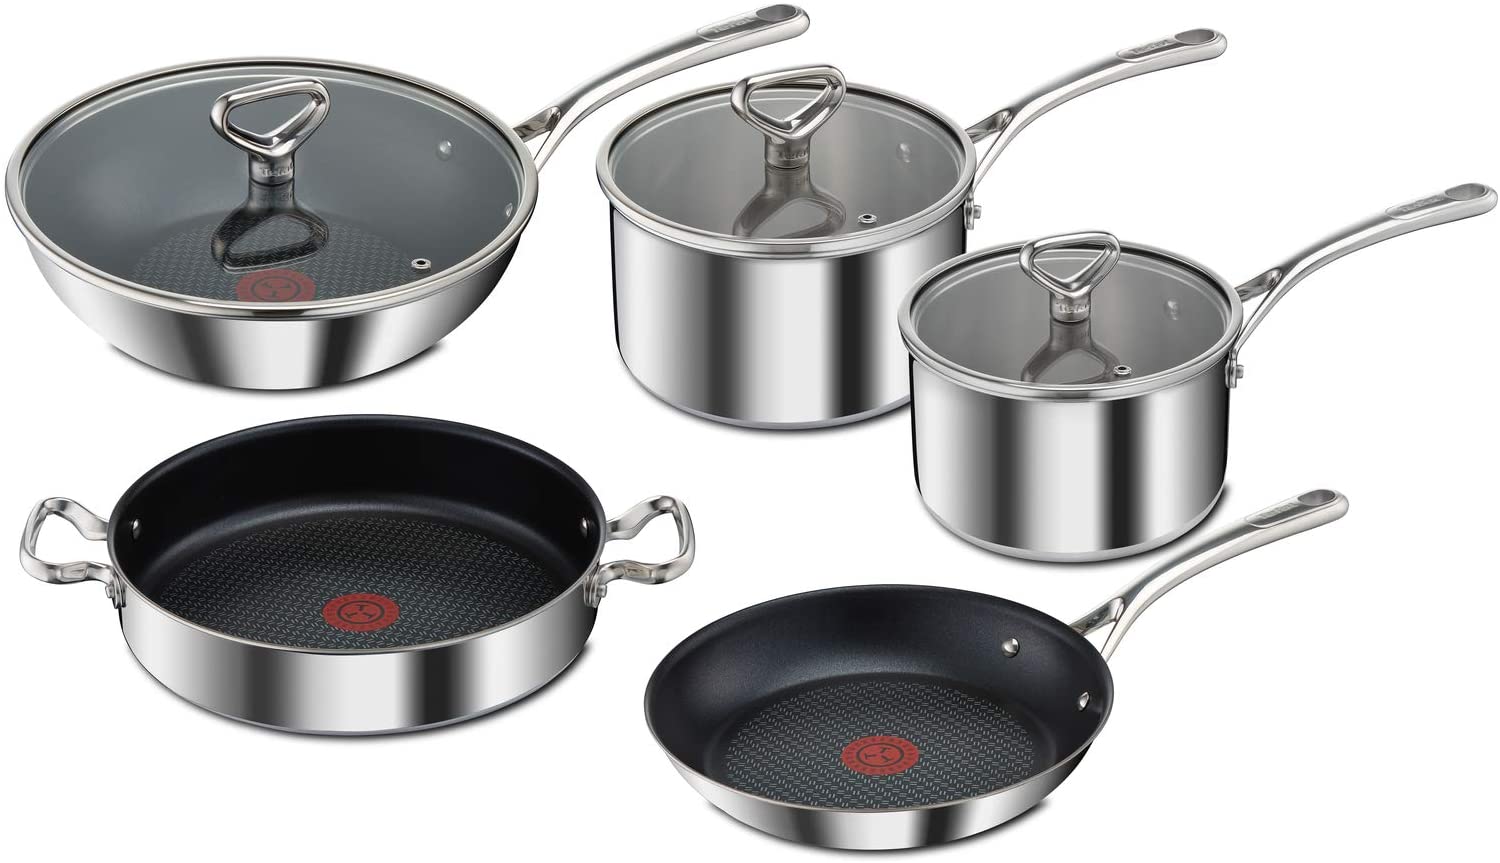 Tefal Reserve Collection E475S544 Tri-Ply Induction Saucepan with 2 Handles 28 cm with Glass Lid + Frying Pan 26 cm Saucepans 18/20 cm with Glass Lid + Wok Pan 28 cm